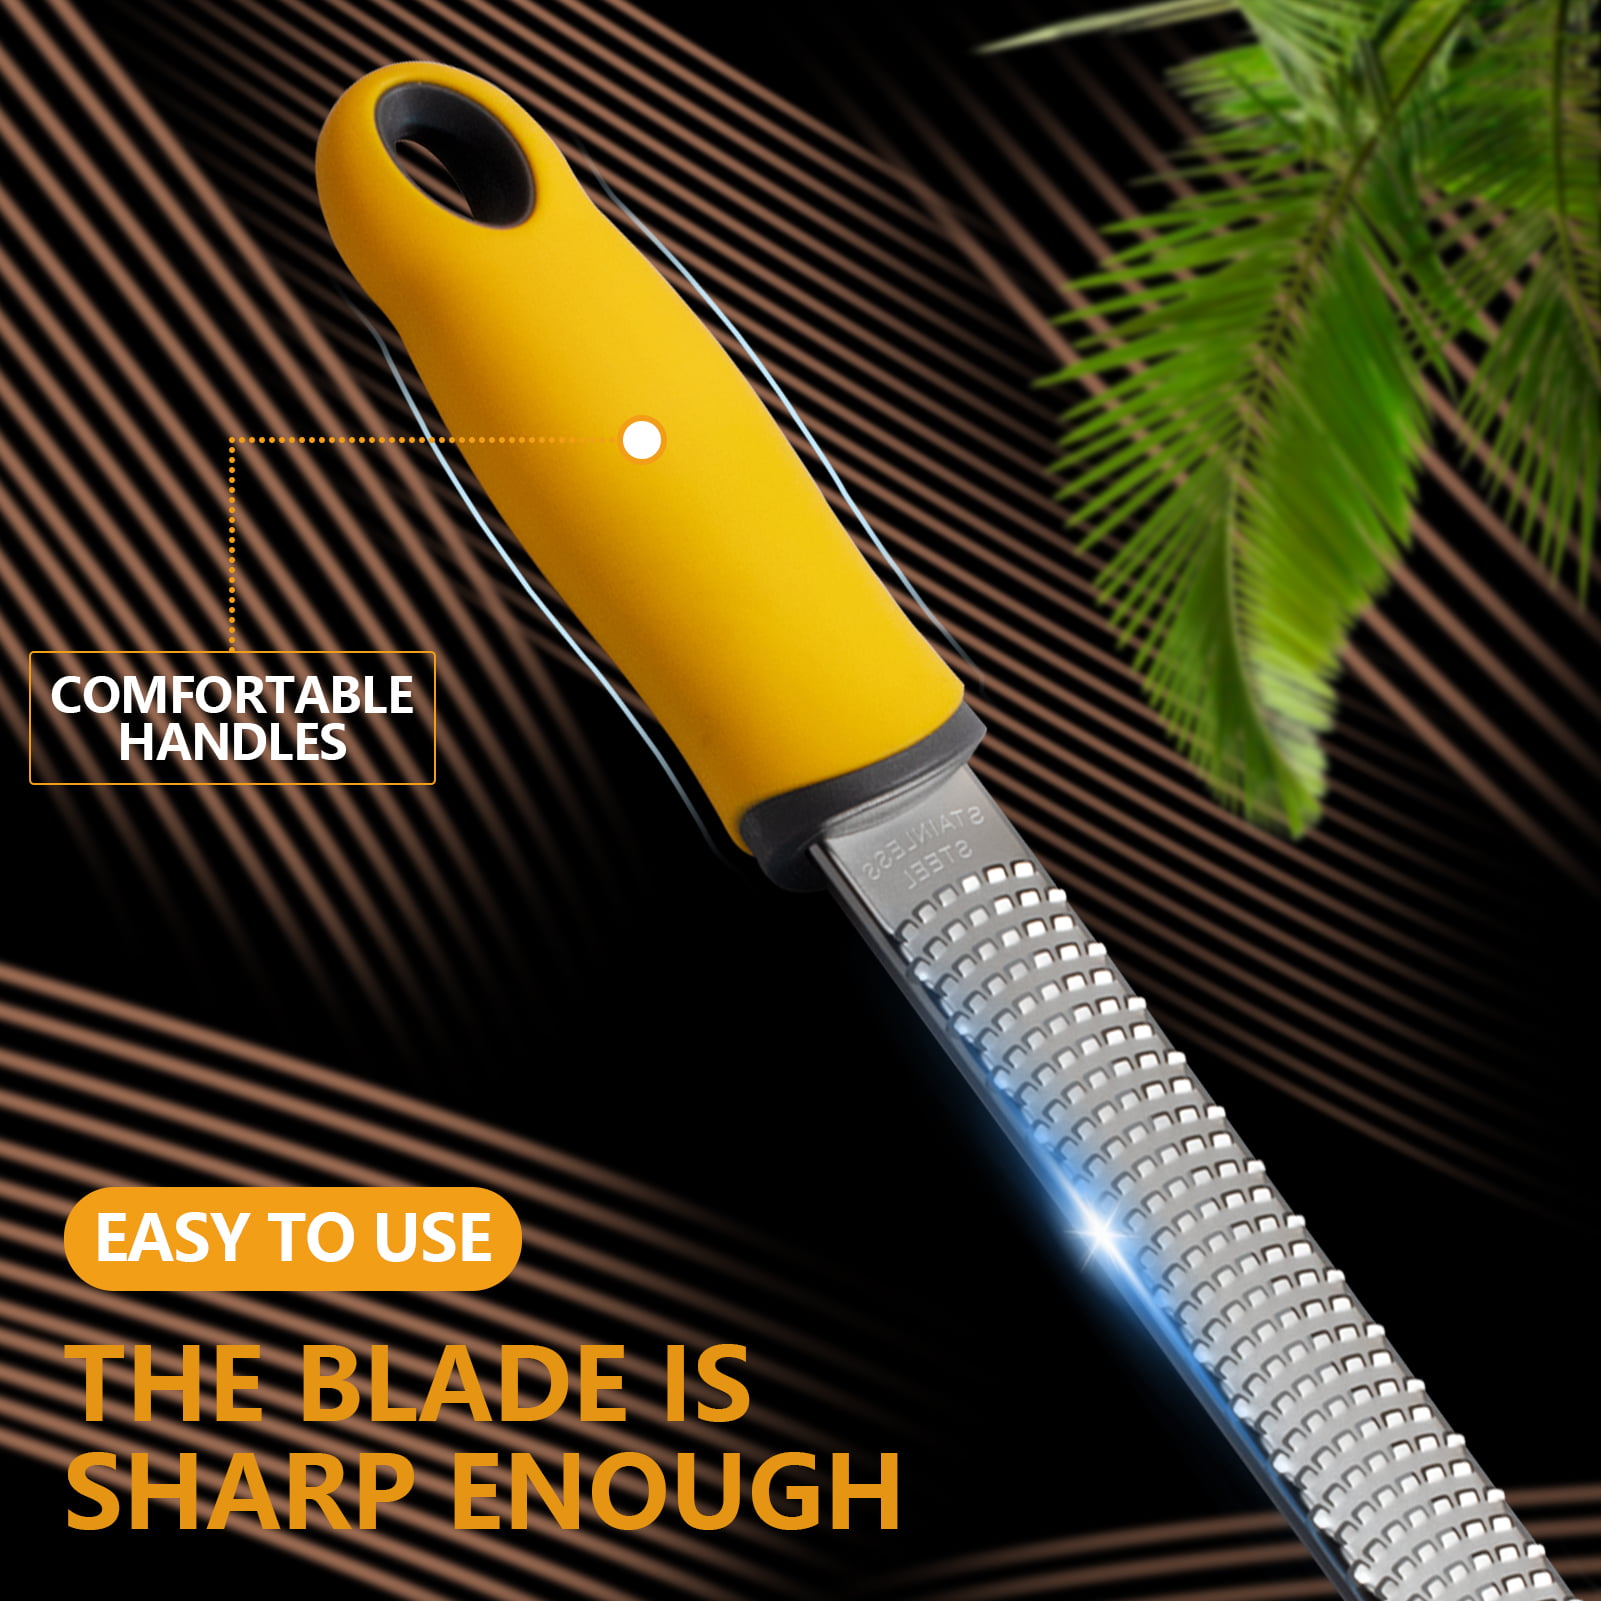 Stainless Steel Cheese Grater, Lemon, Citrus and Channel Knife for Kitchen, Ginger, Garlic, Nutmeg, Chocolate, Vegetables, Fruits, Non-Slip Handle